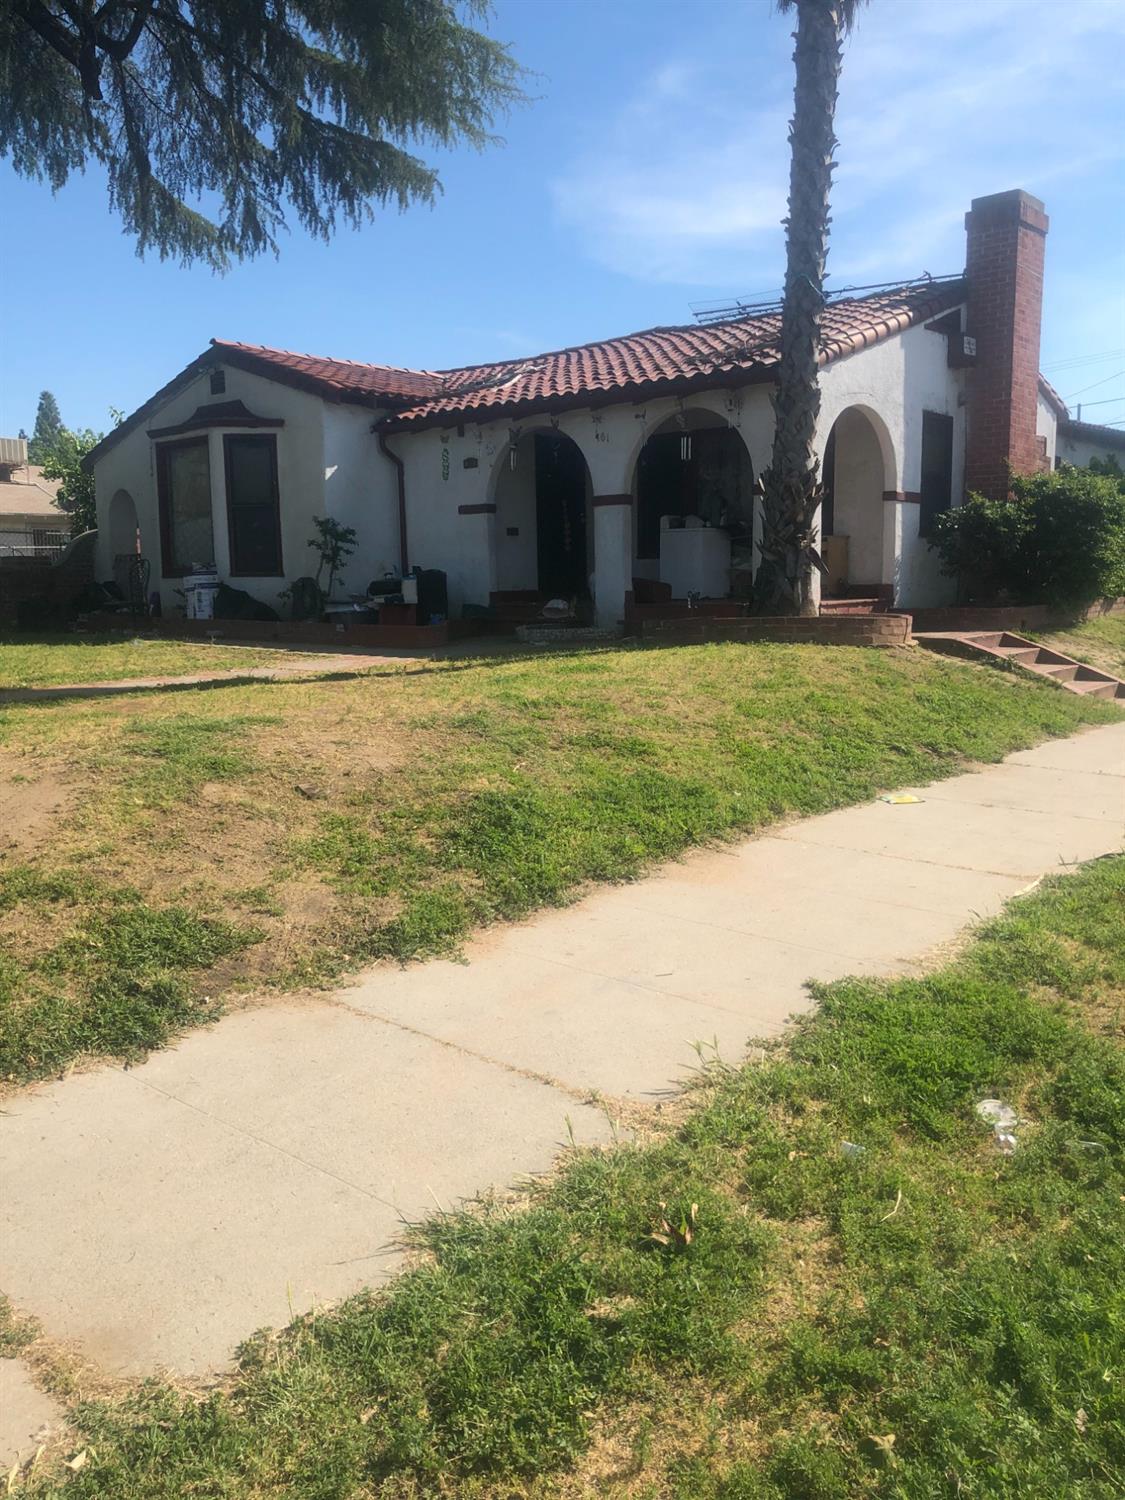 Photo of 761 Collins Ave in Fresno, CA